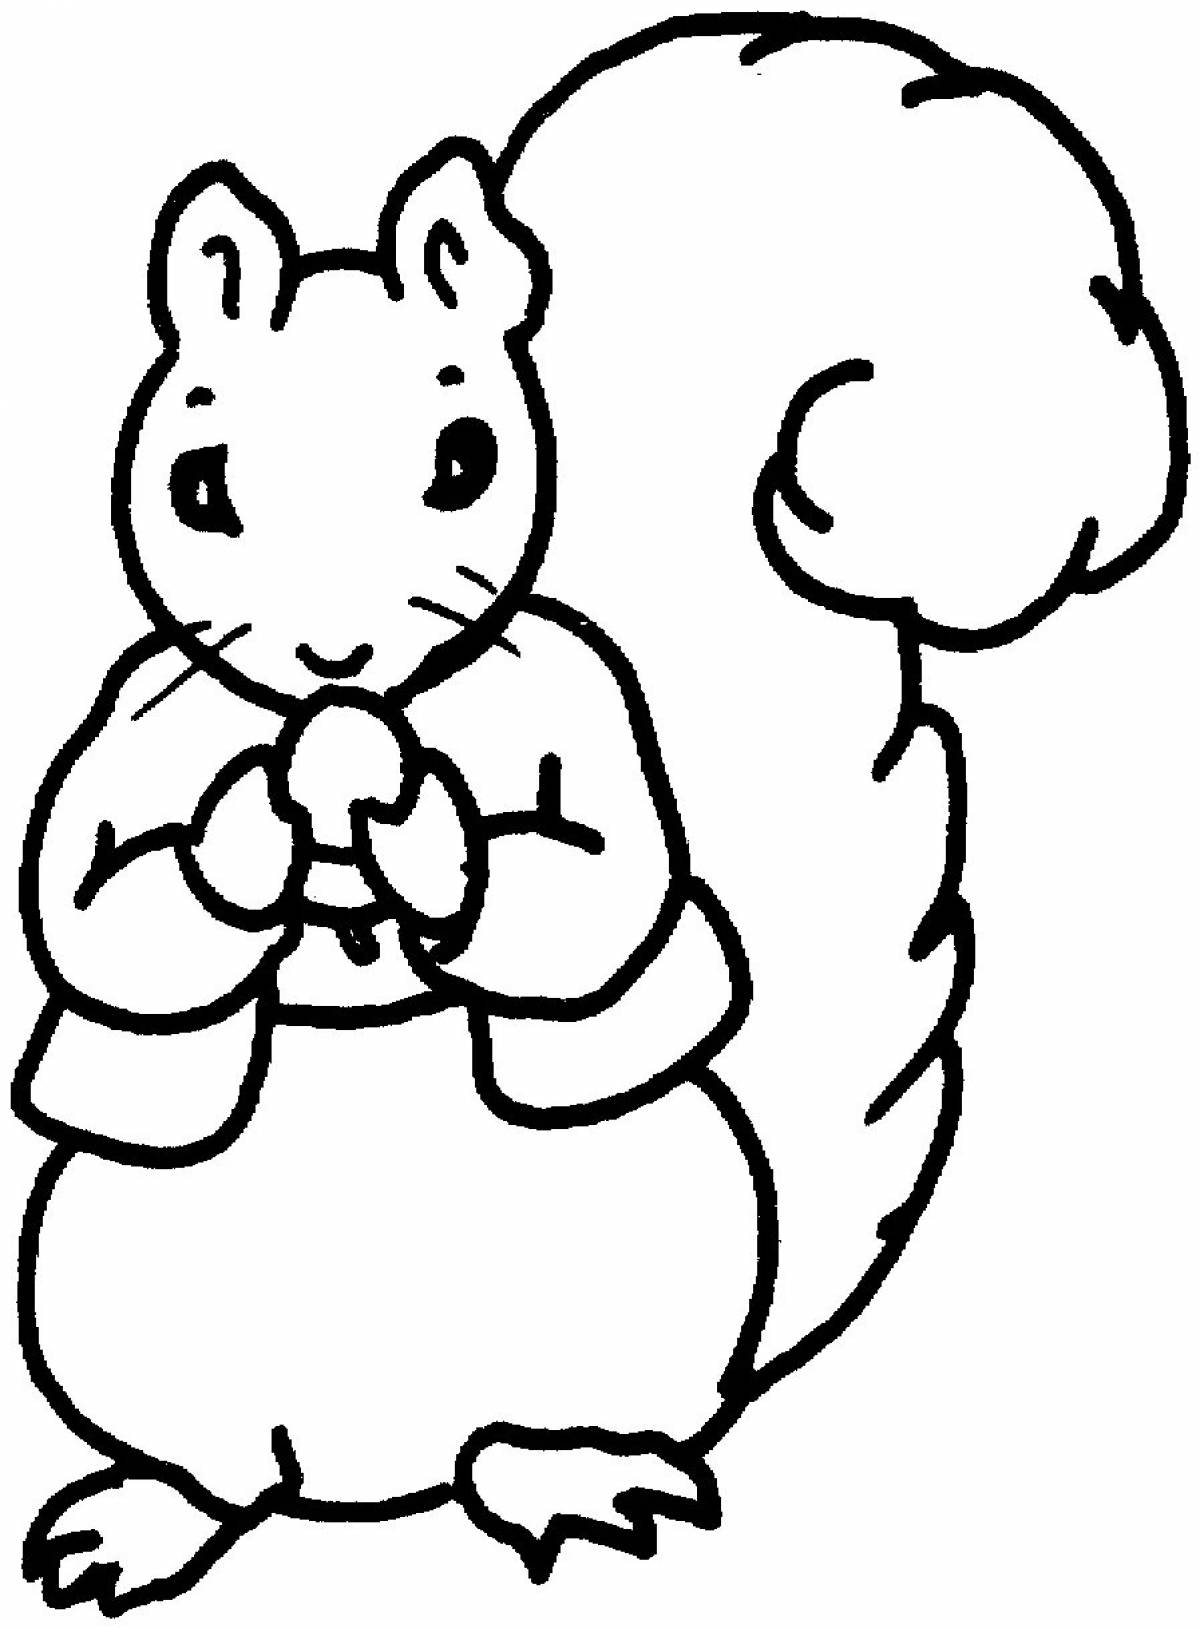 Coloring game squirrel for children 2-3 years old